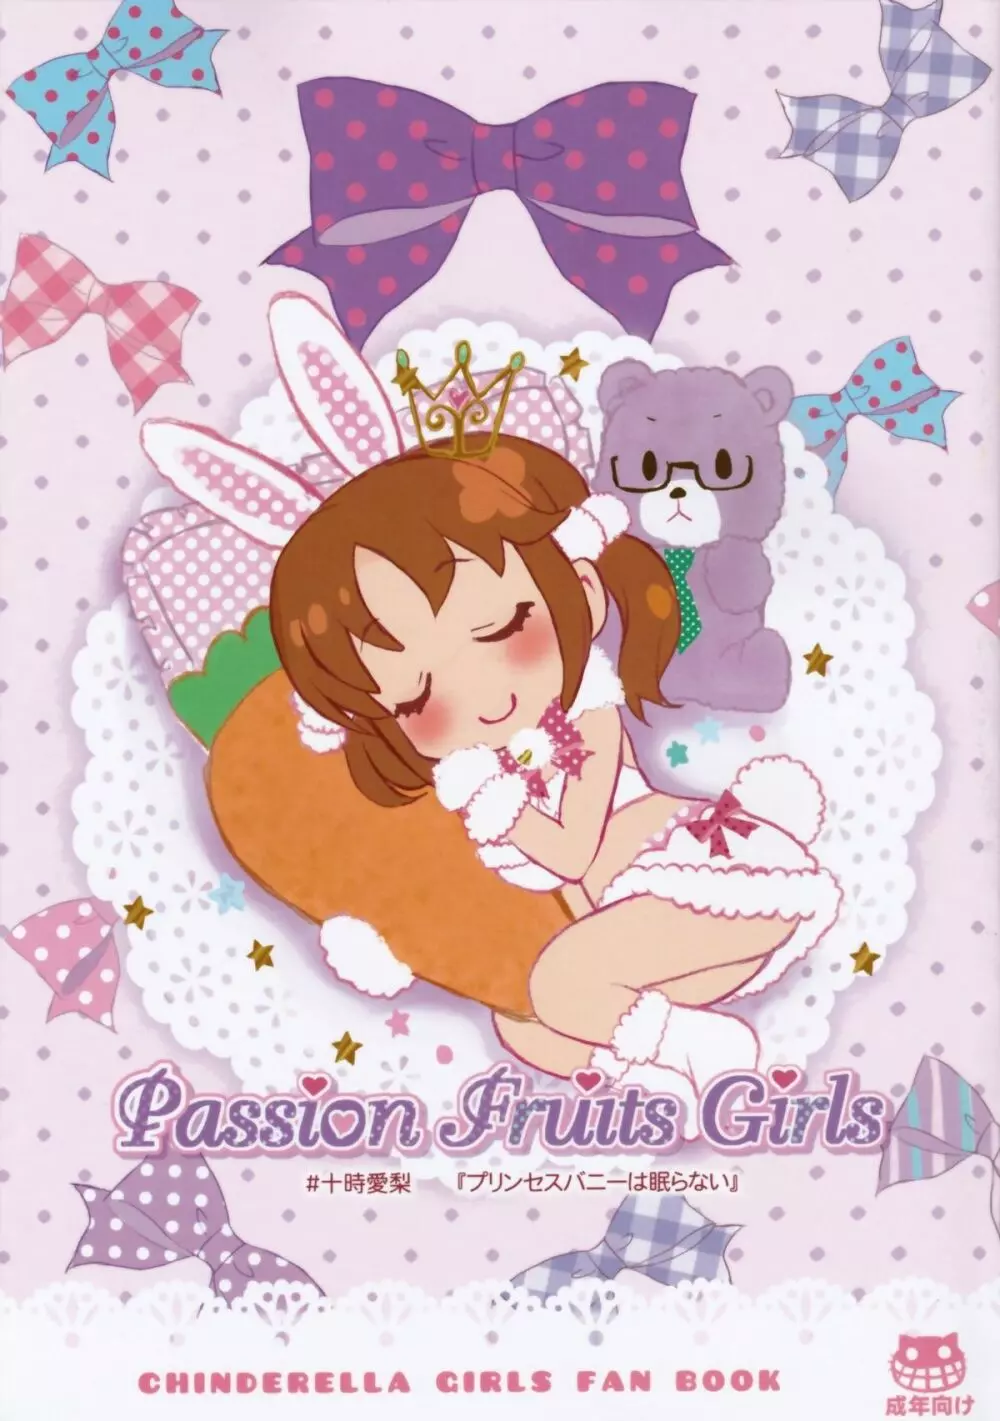 Passion Fruit Girls #十時愛梨 プリンセスバニーは眠らない。 Page.1